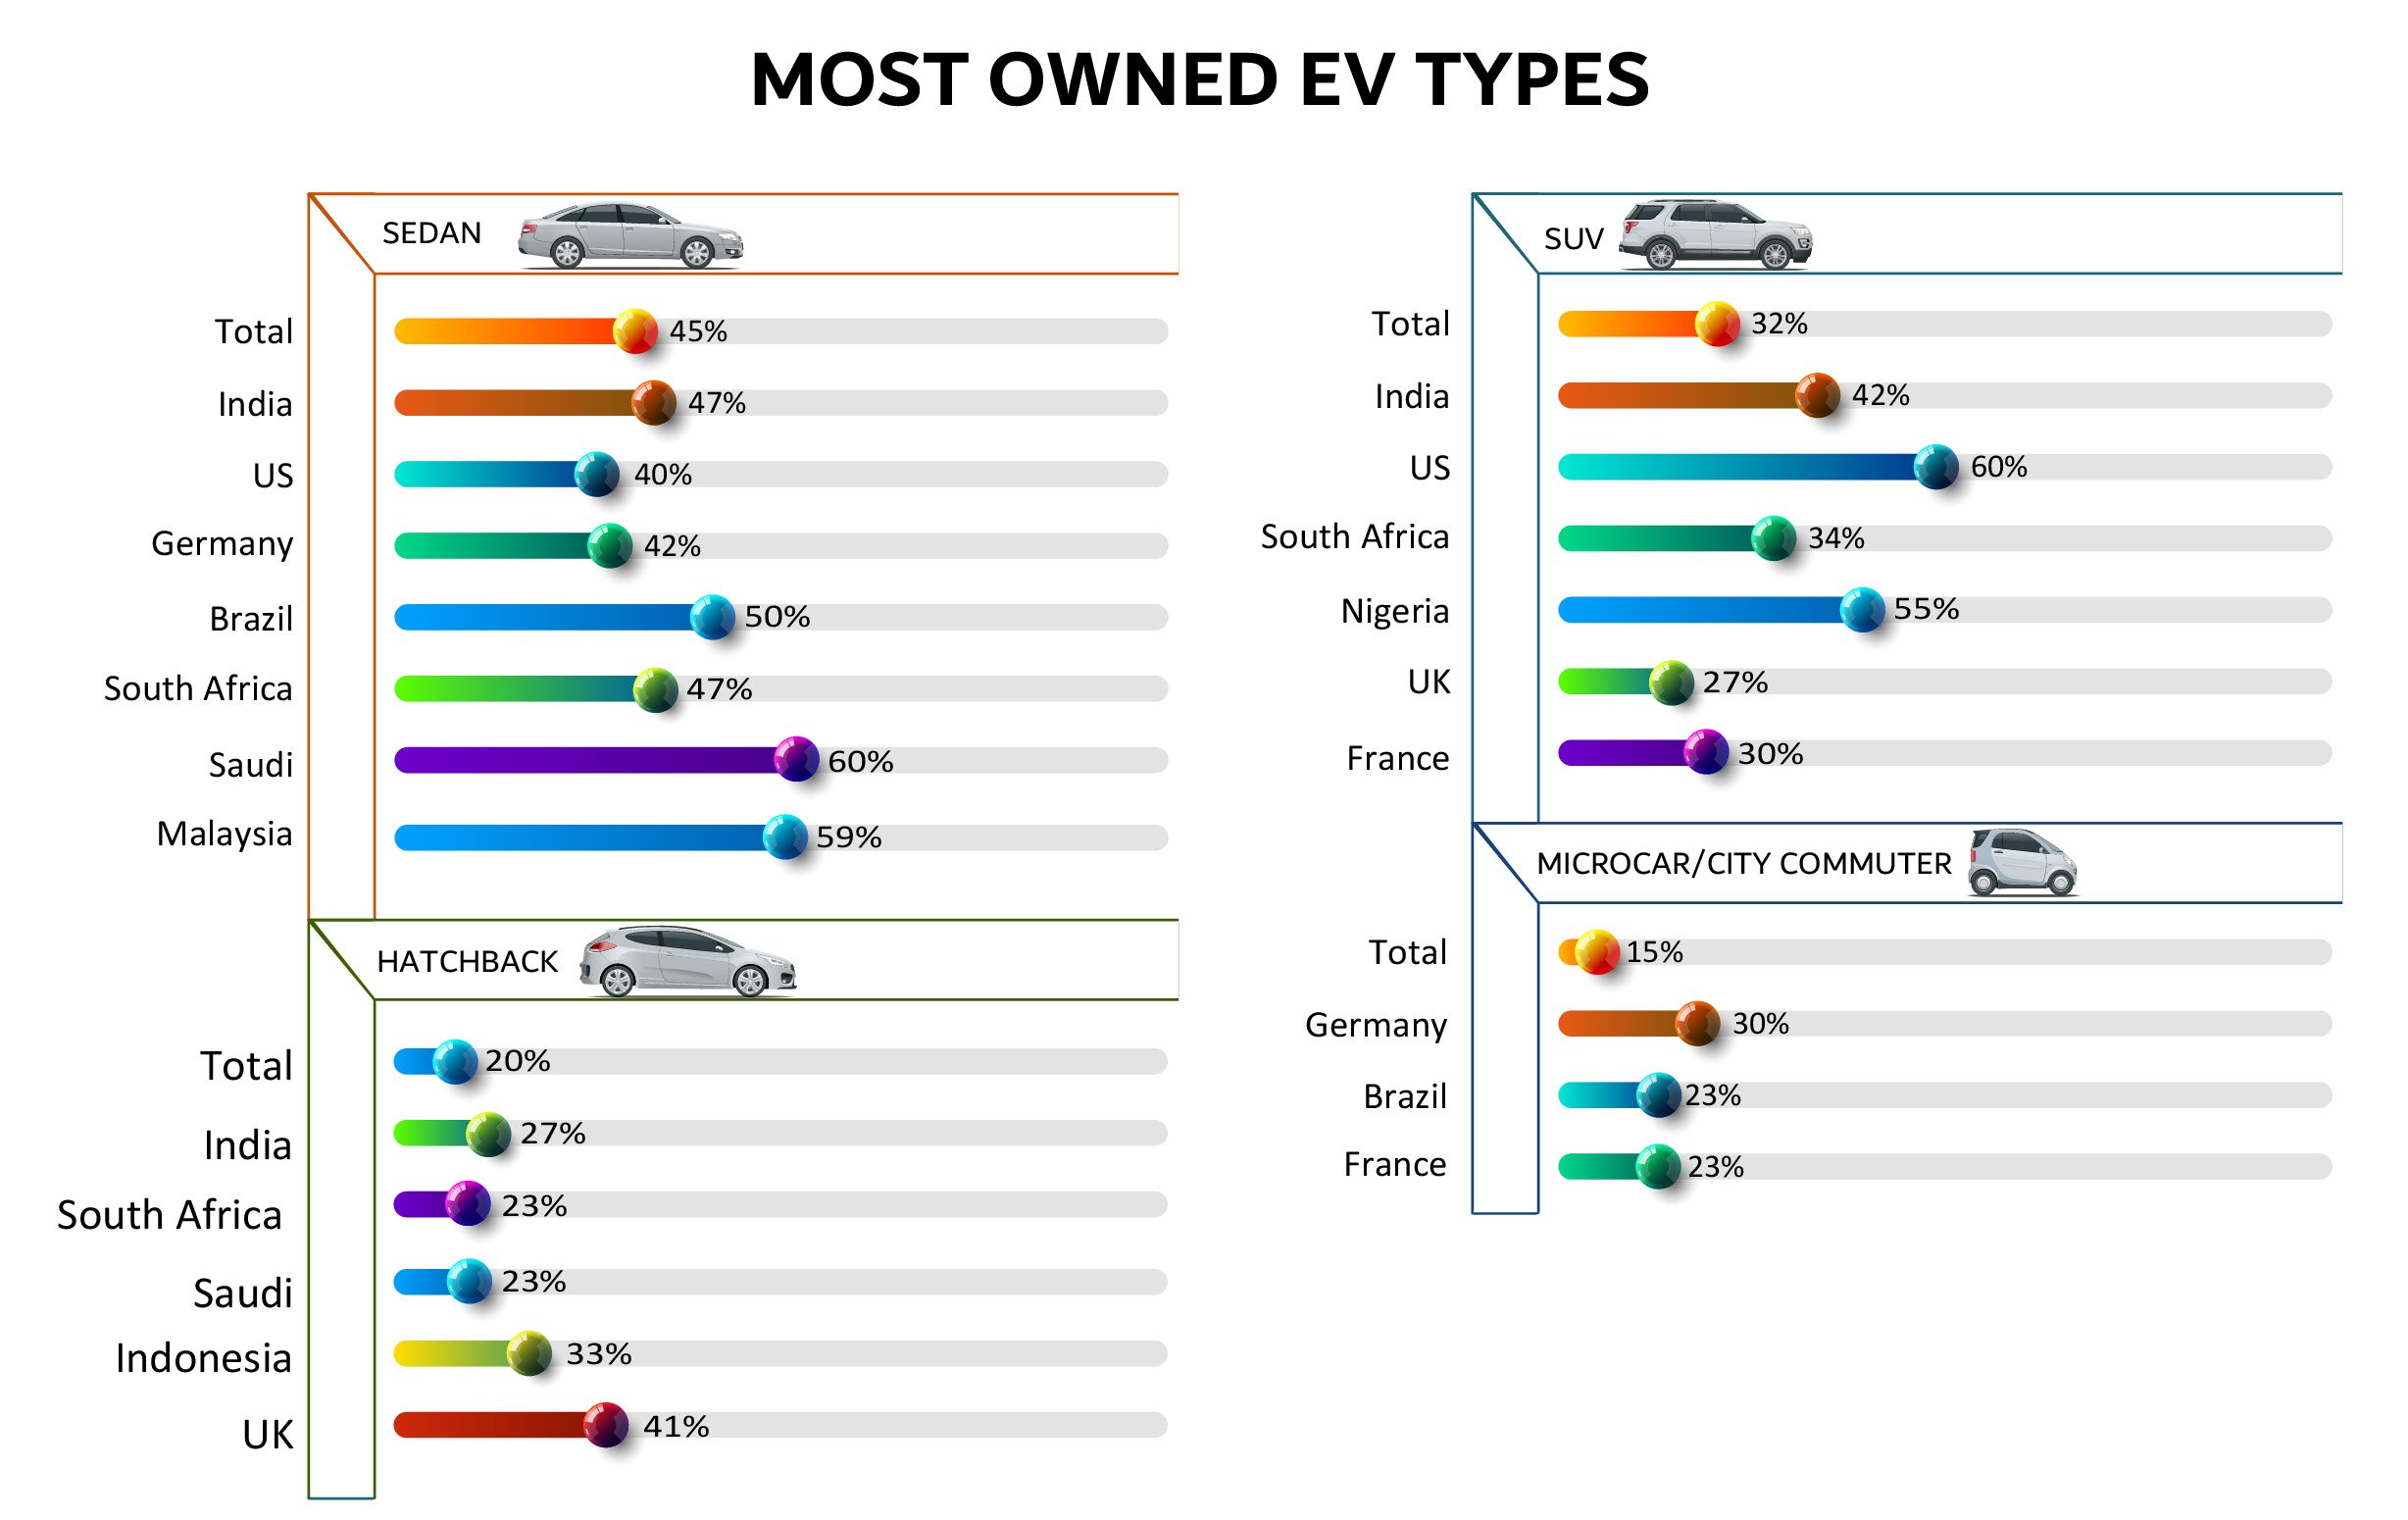 Most owned EV types02-01 (2)